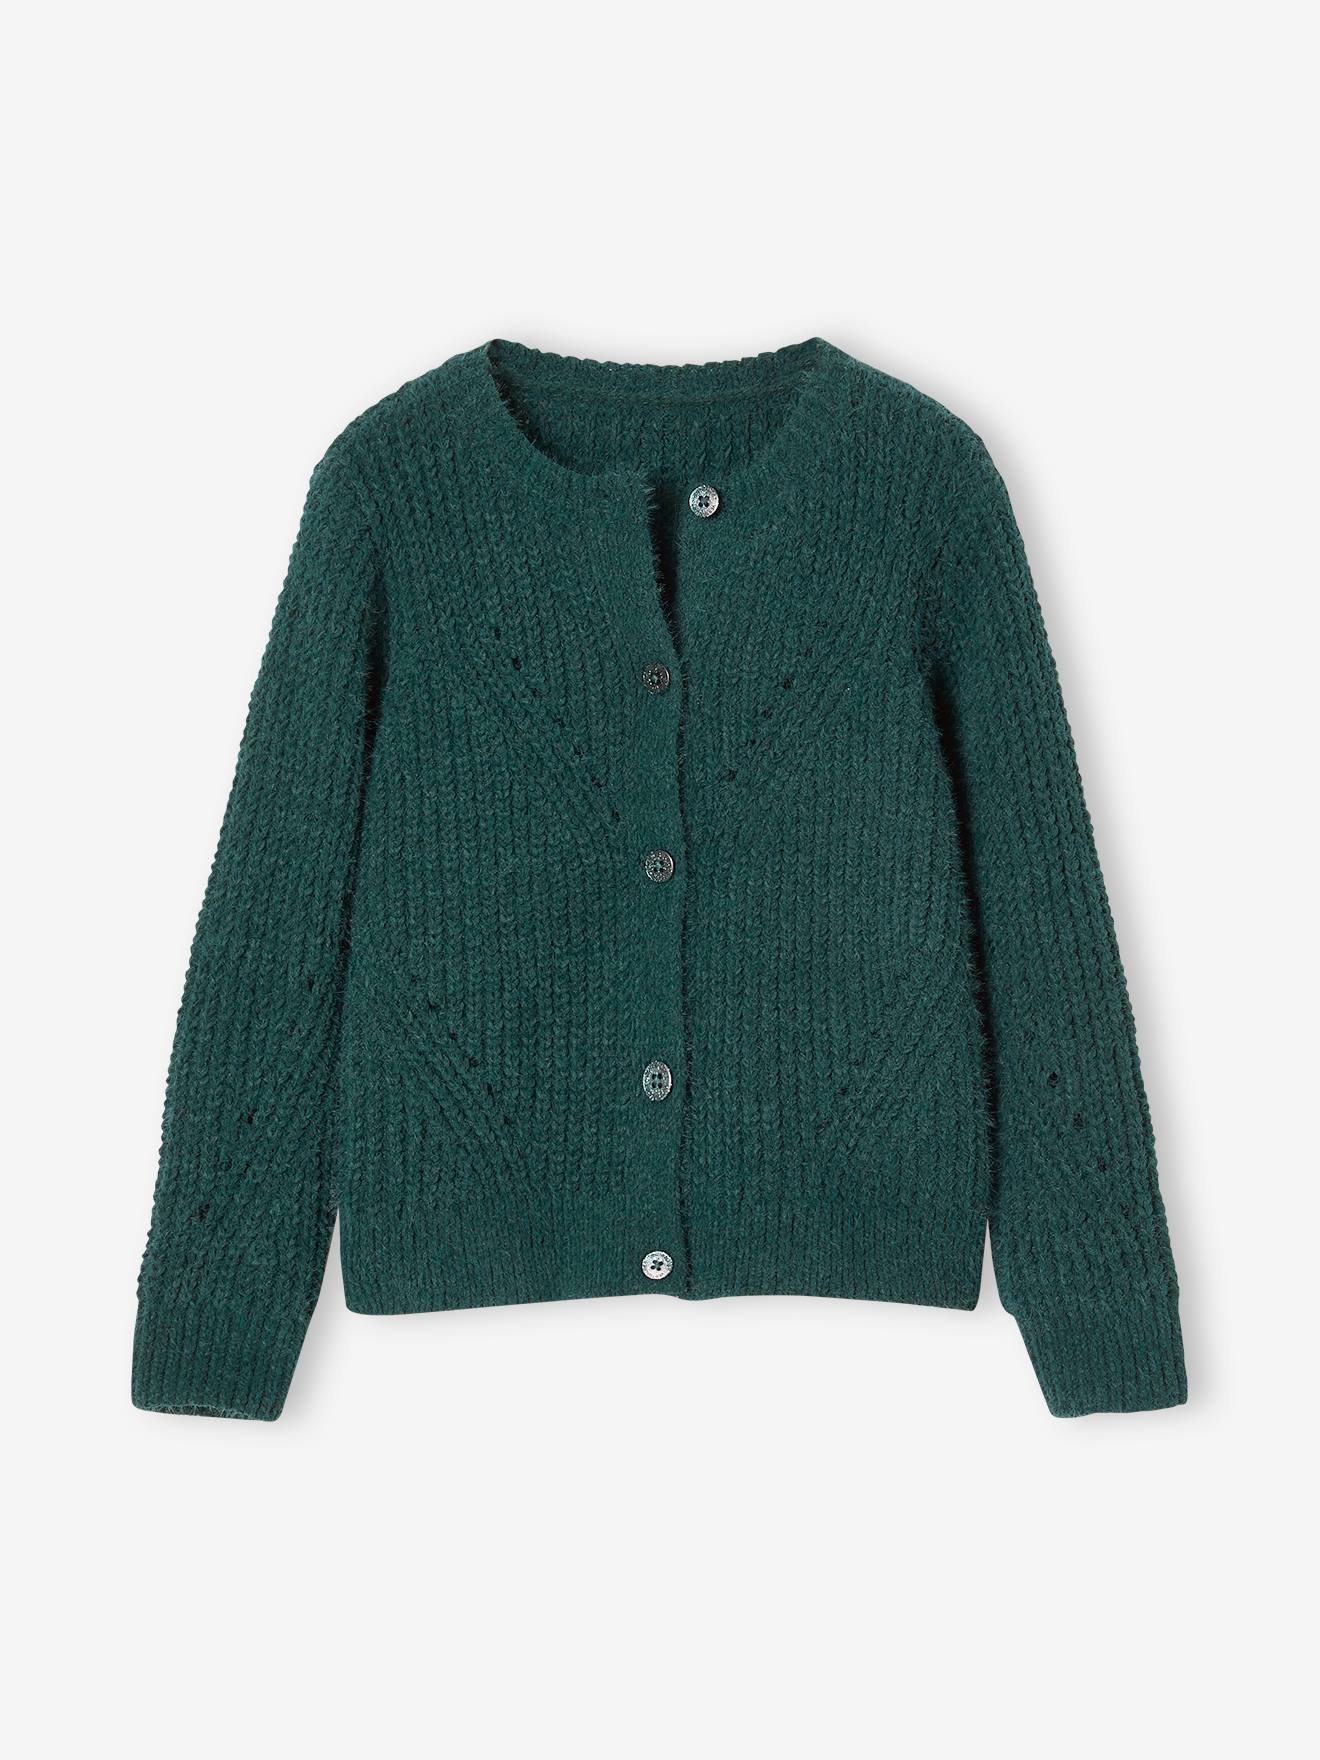 Cardigan in Openwork Chenille Knit for Girls green